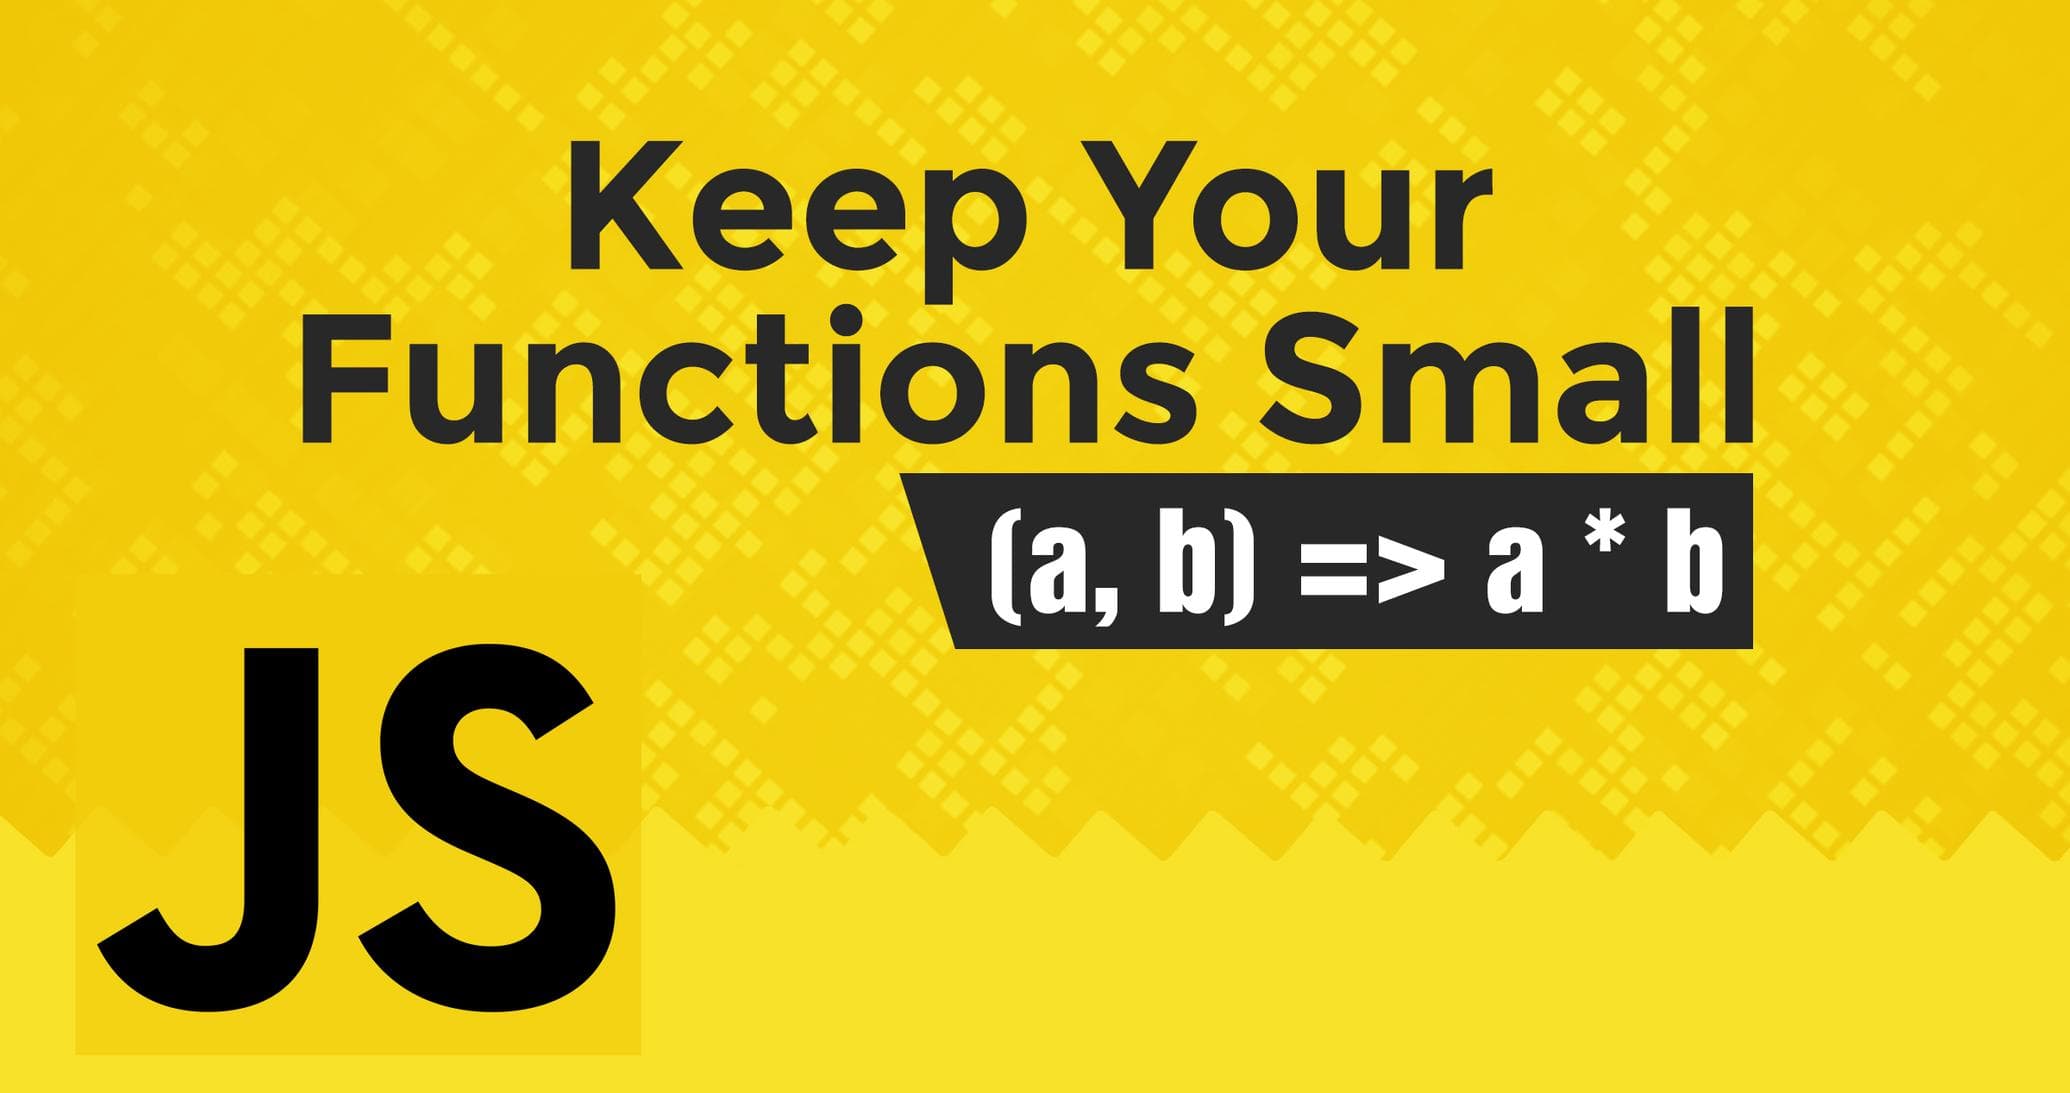 Keep your functions small